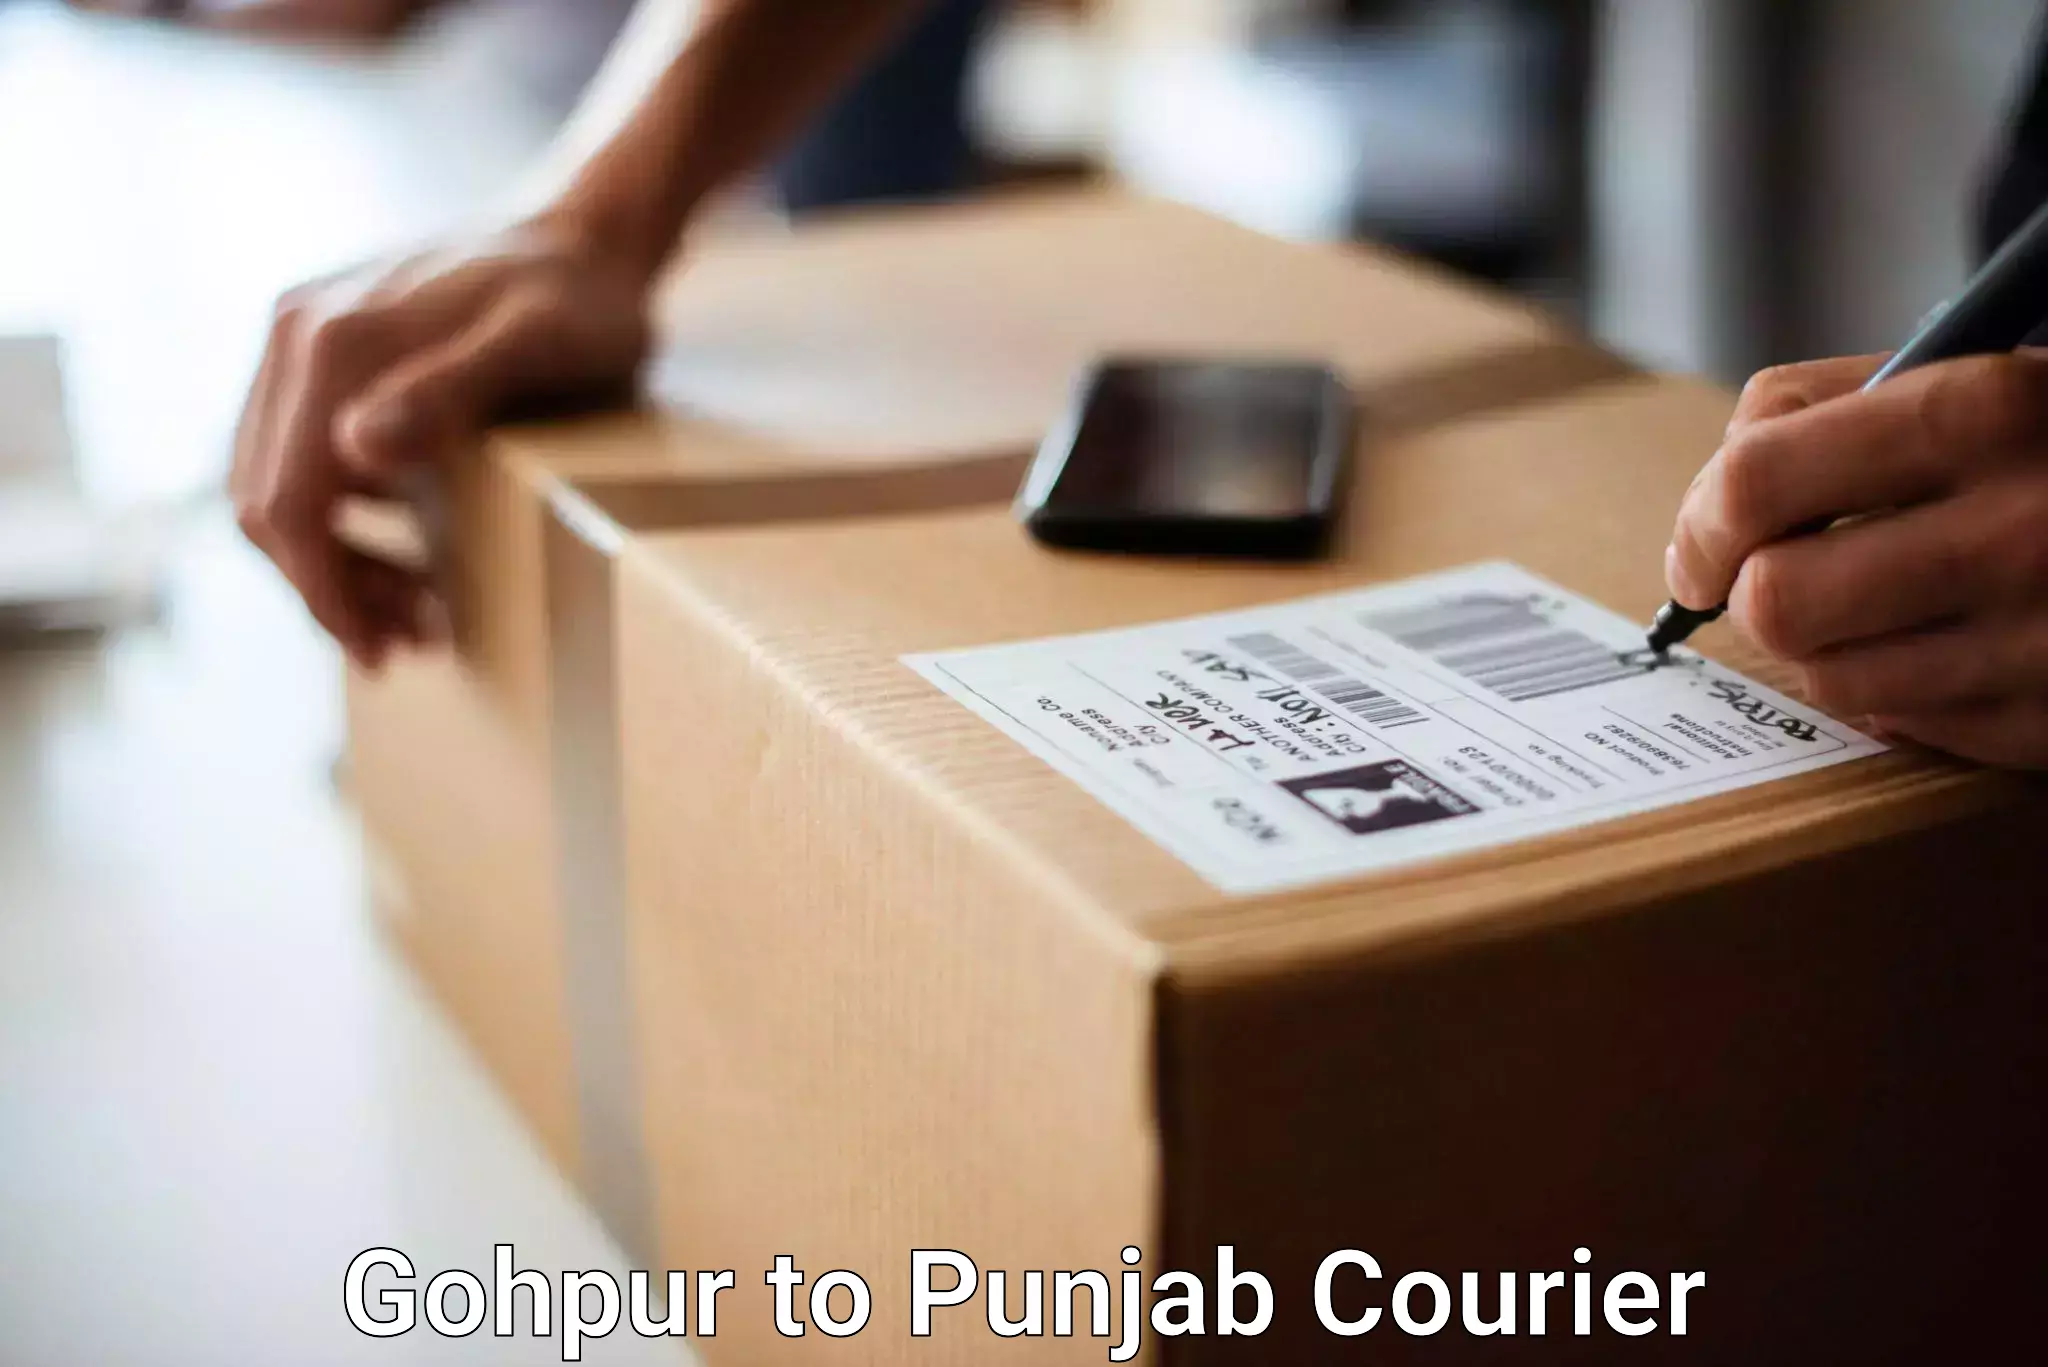 Instant baggage transport quote Gohpur to Mohali